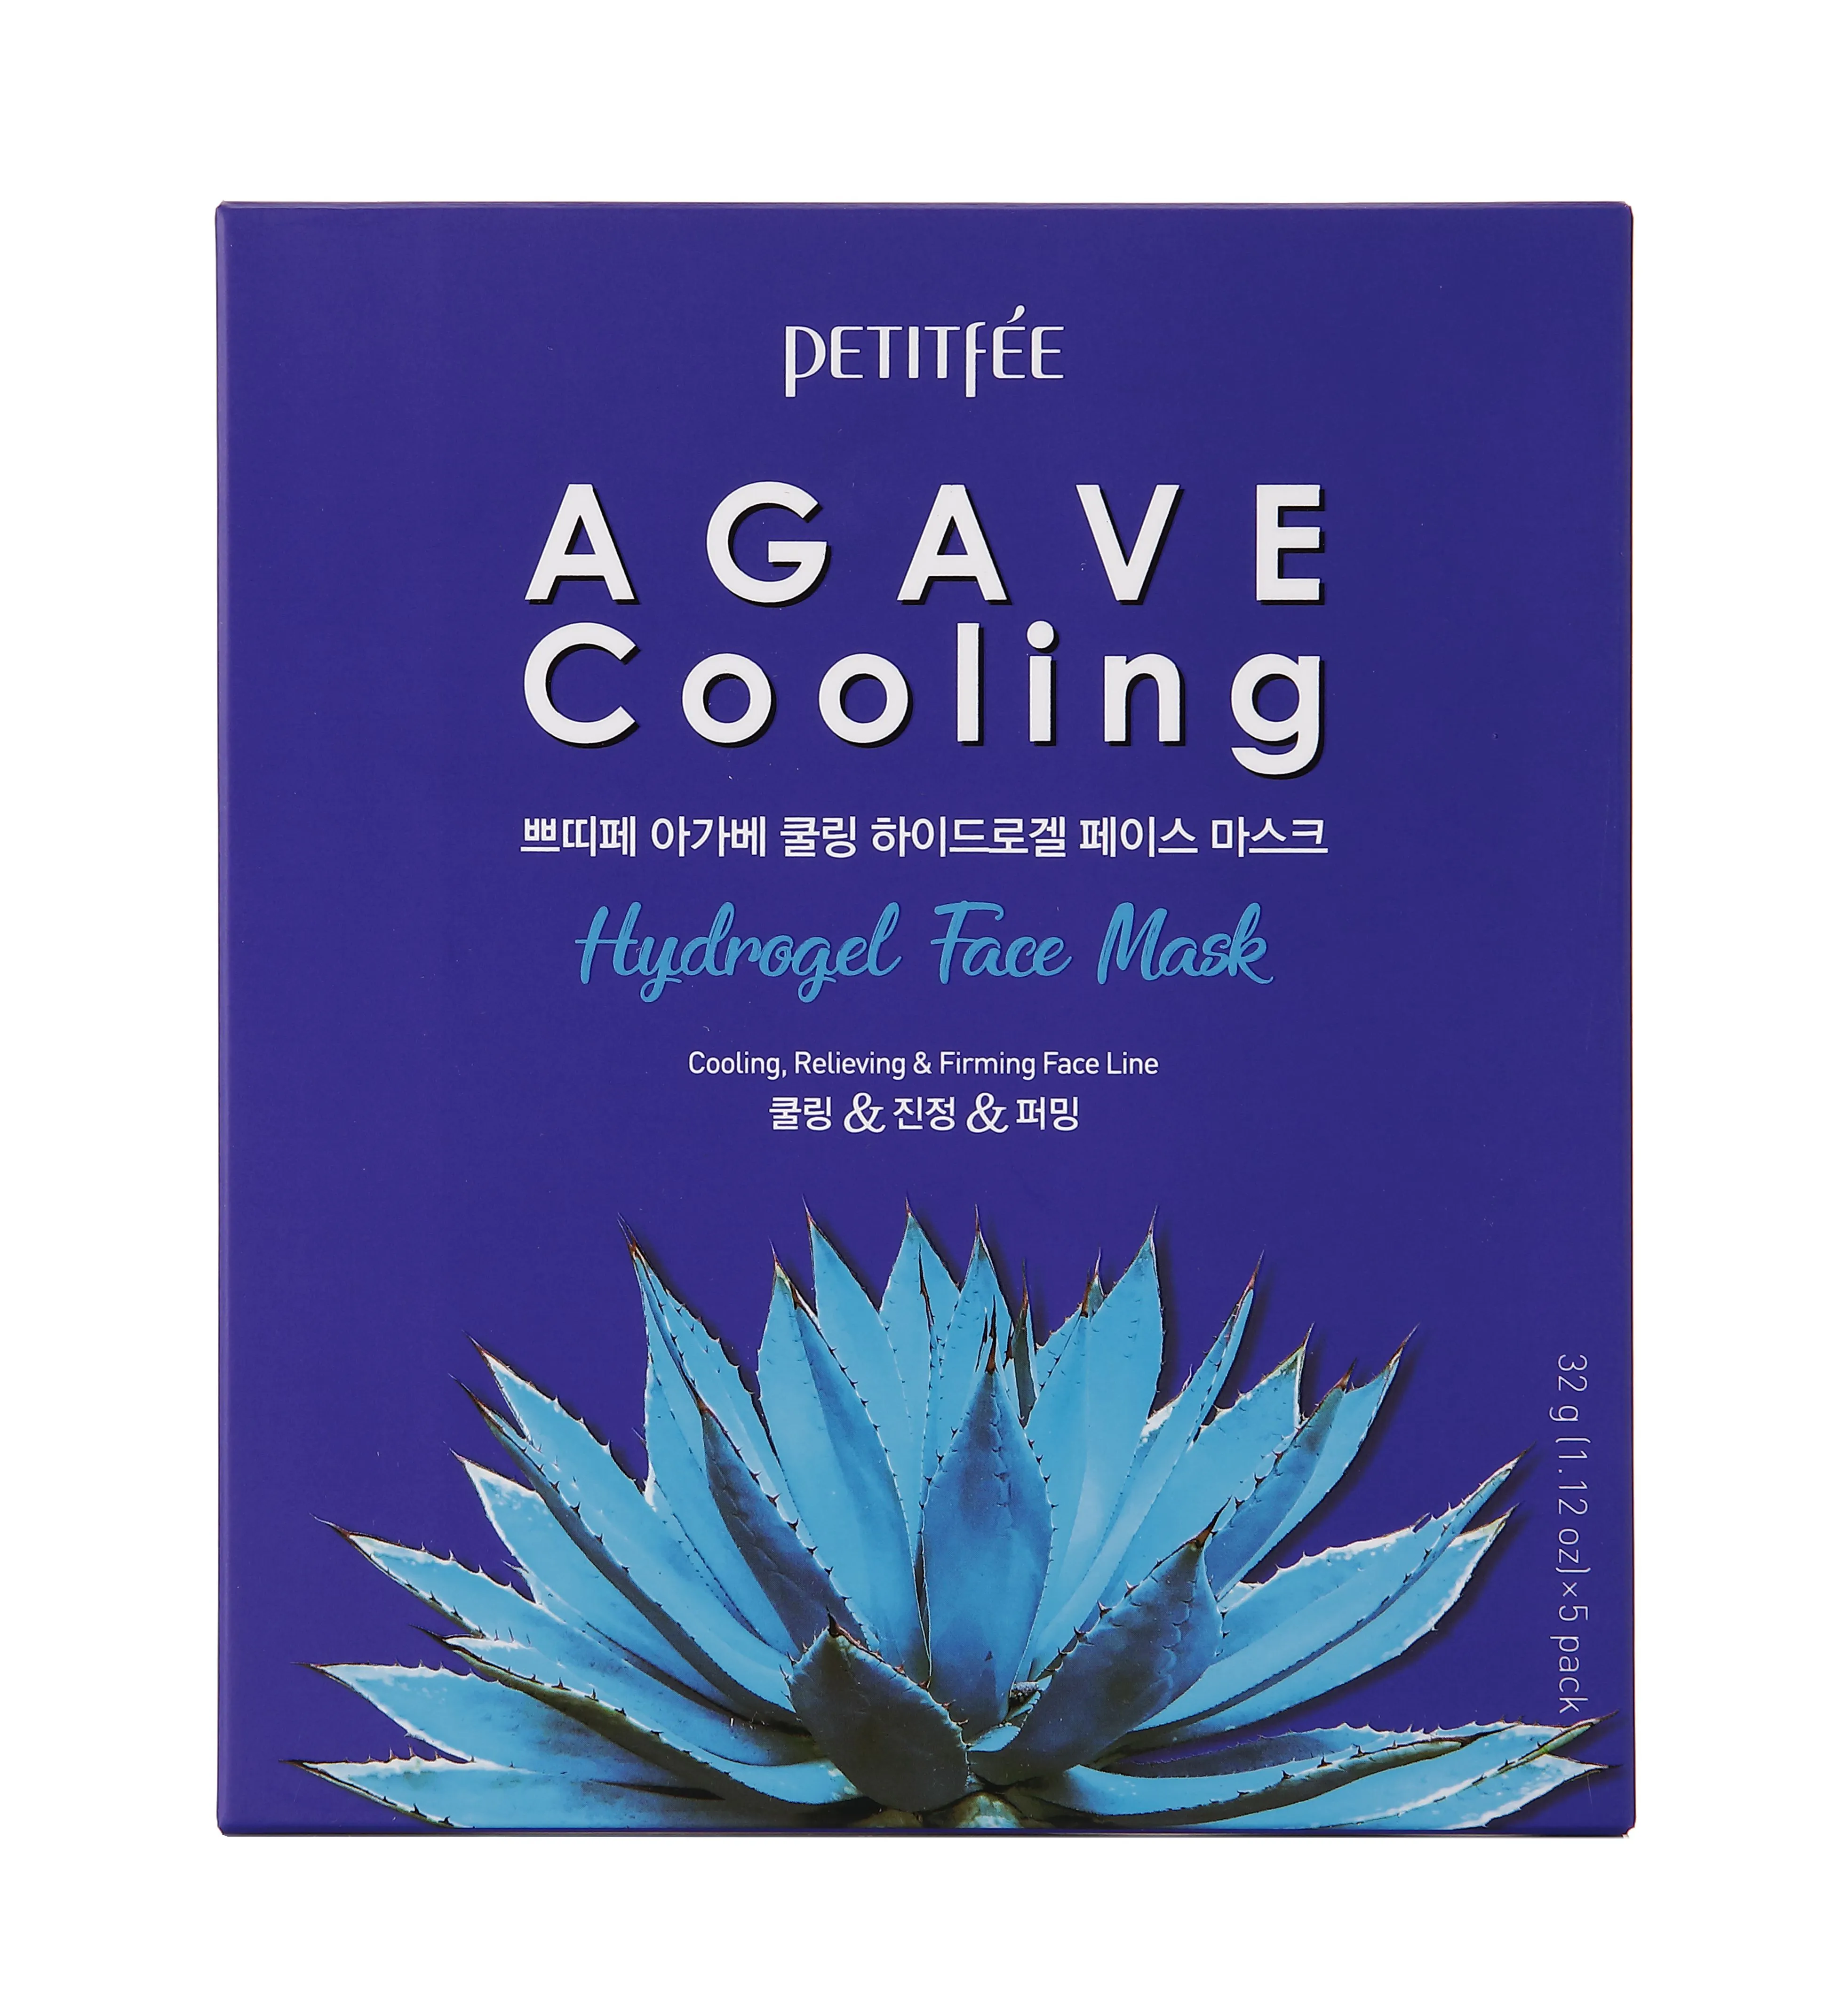 Petitfee & Koelf Agave Cooling Hydrogel Face Mask 32 g * 5 sheets